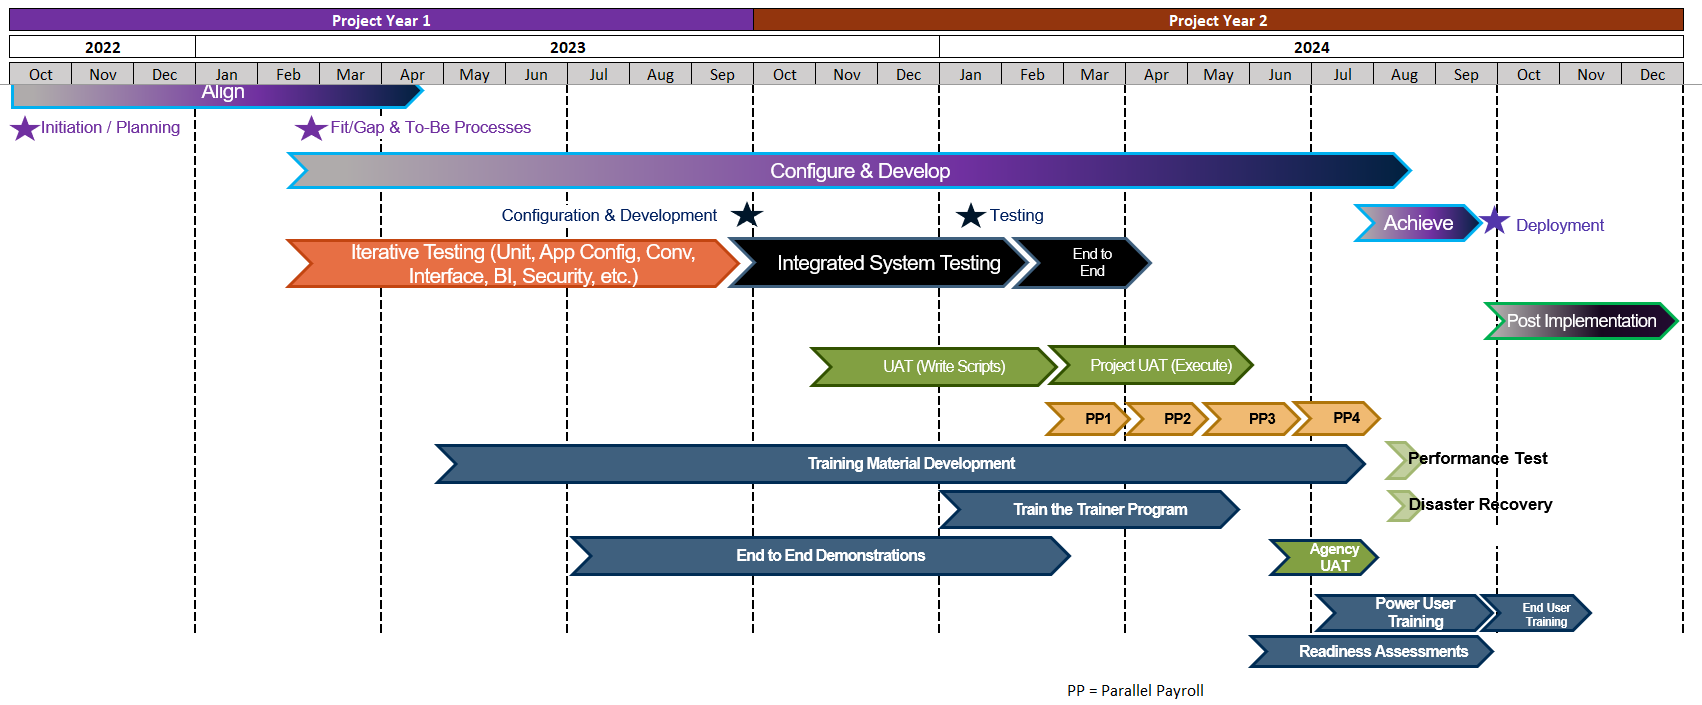 image diagram of the current timeline of Phase 1A of the HRIS modernization project implementation to AZ360